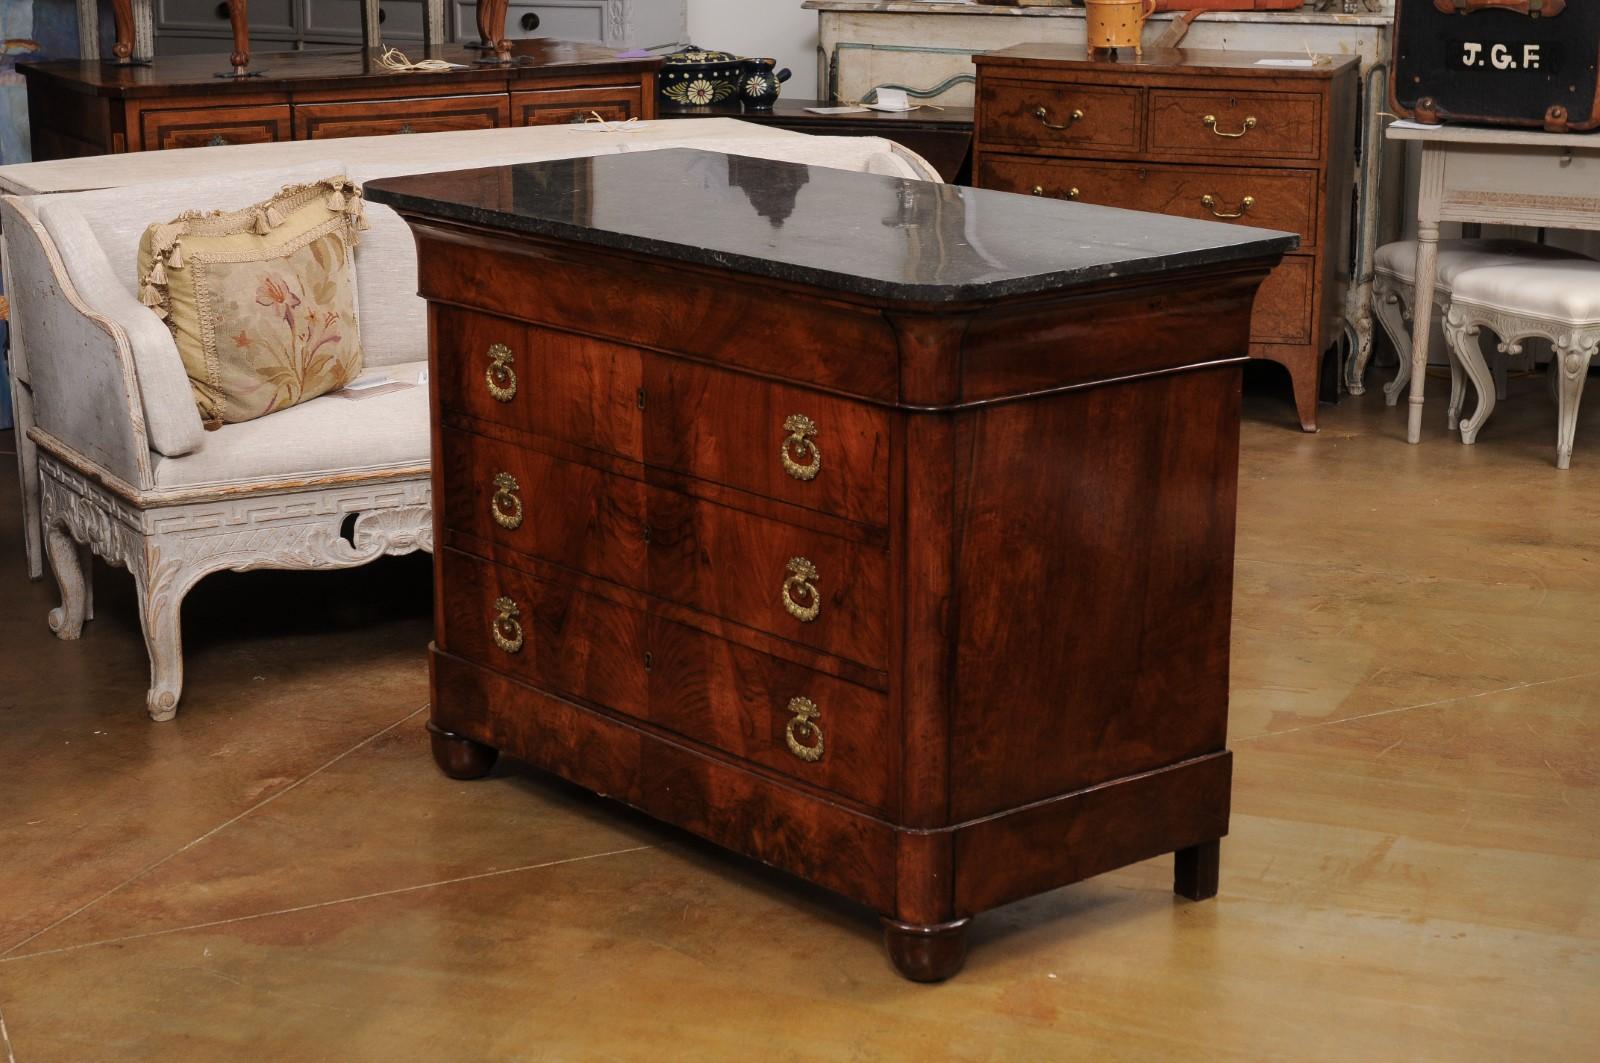 Italian Empire Style 1890s Marble Top Four-Drawer Commode with Bronze Hardware For Sale 7